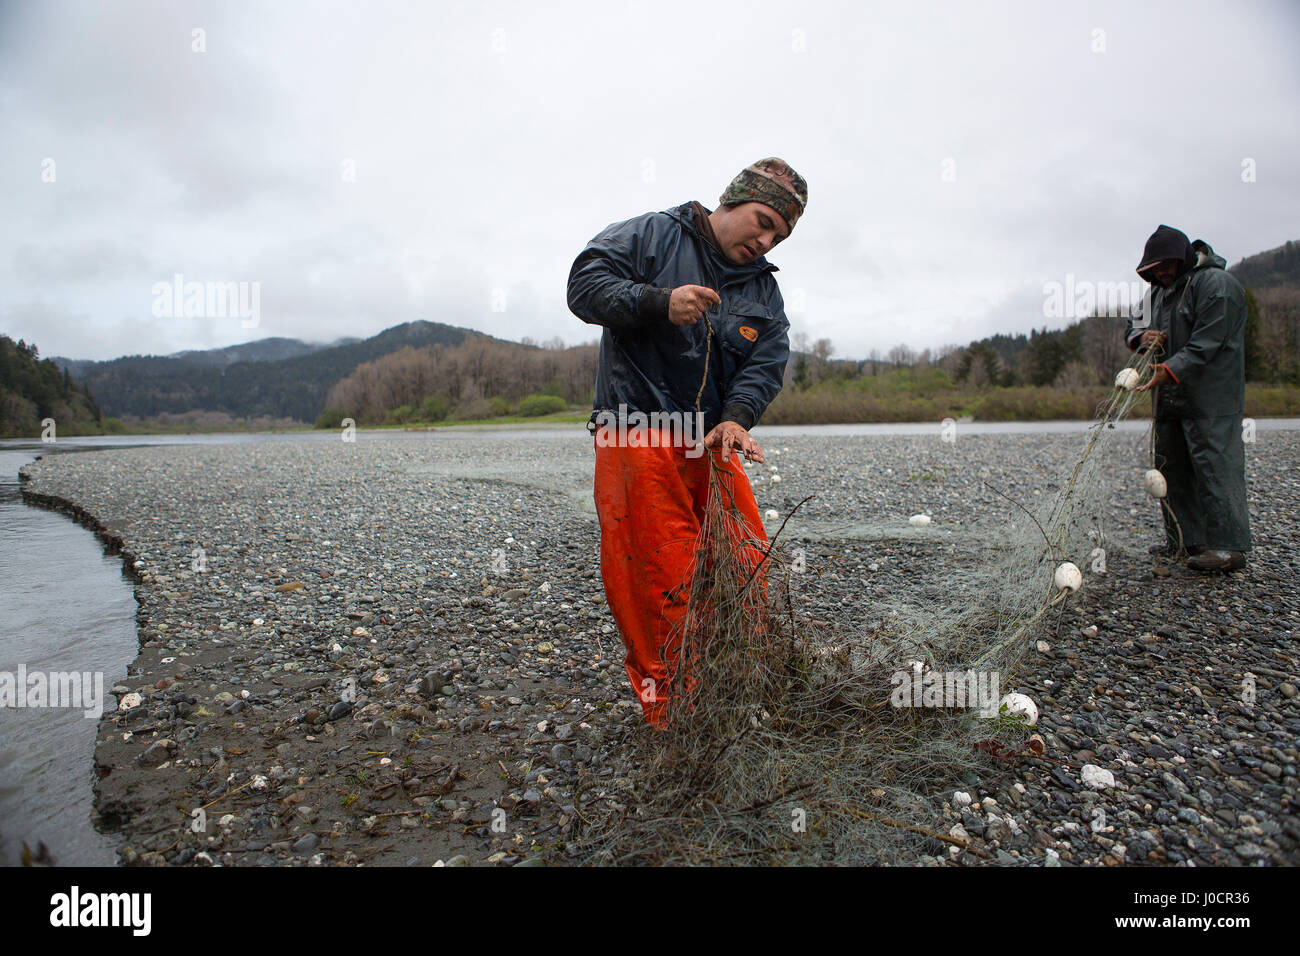 Members of the Yurok Indian Tribe clean their gill net while